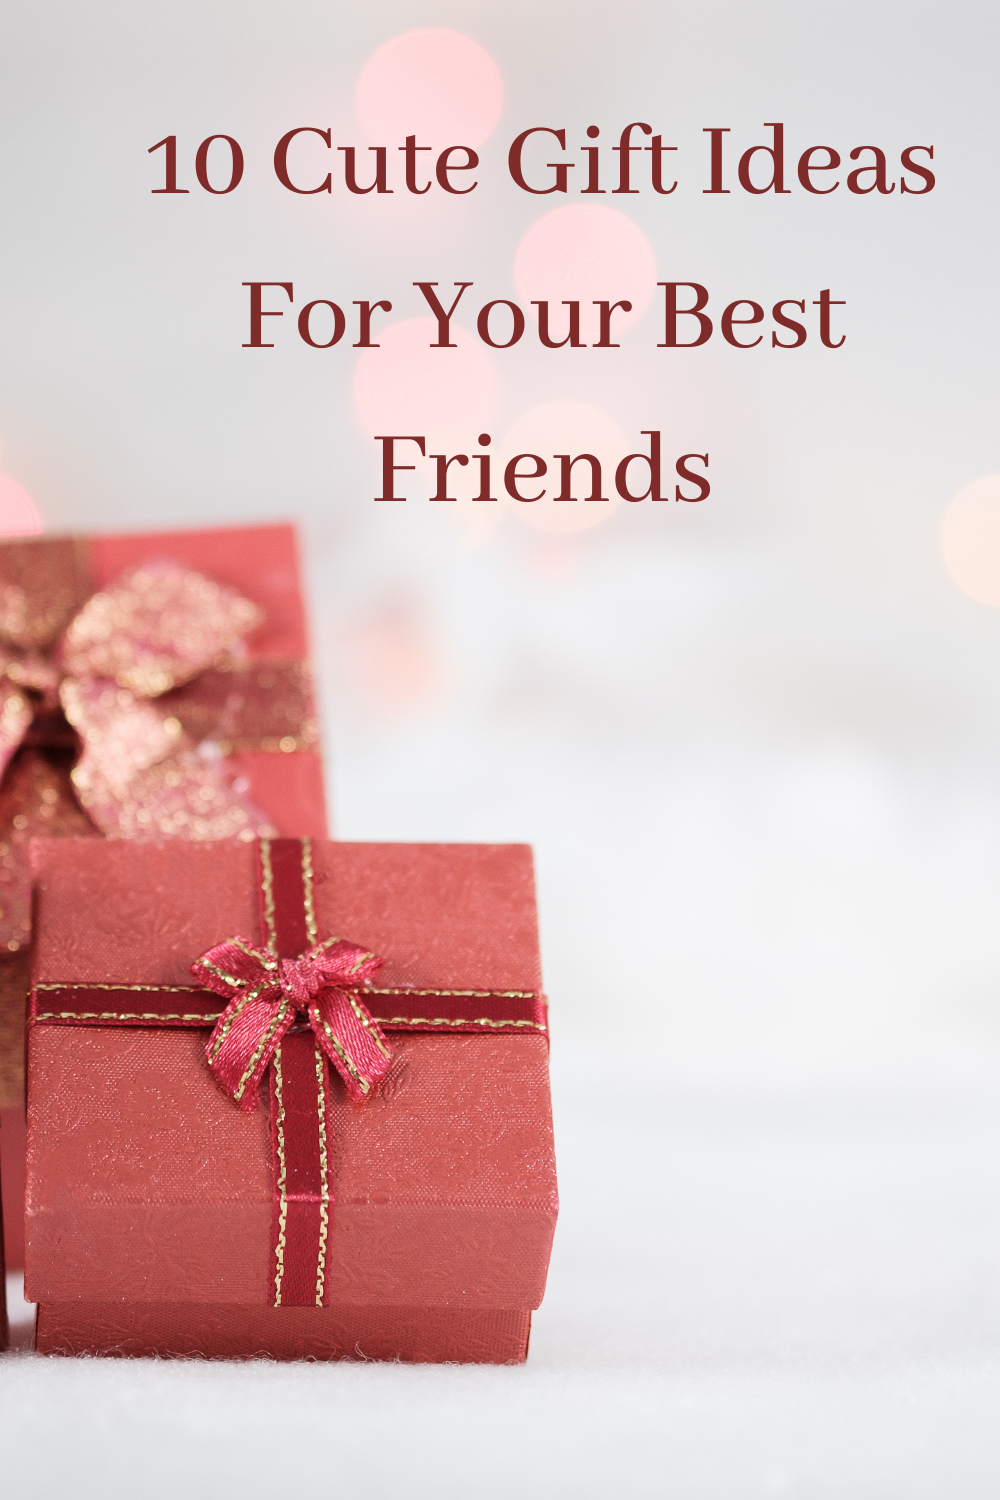 What To Give Your Best Friend Gift Ideas Birthday? Gift Ideas For Friend's  Birthday. Cute Gifts Idea., by Himanshu Mehta